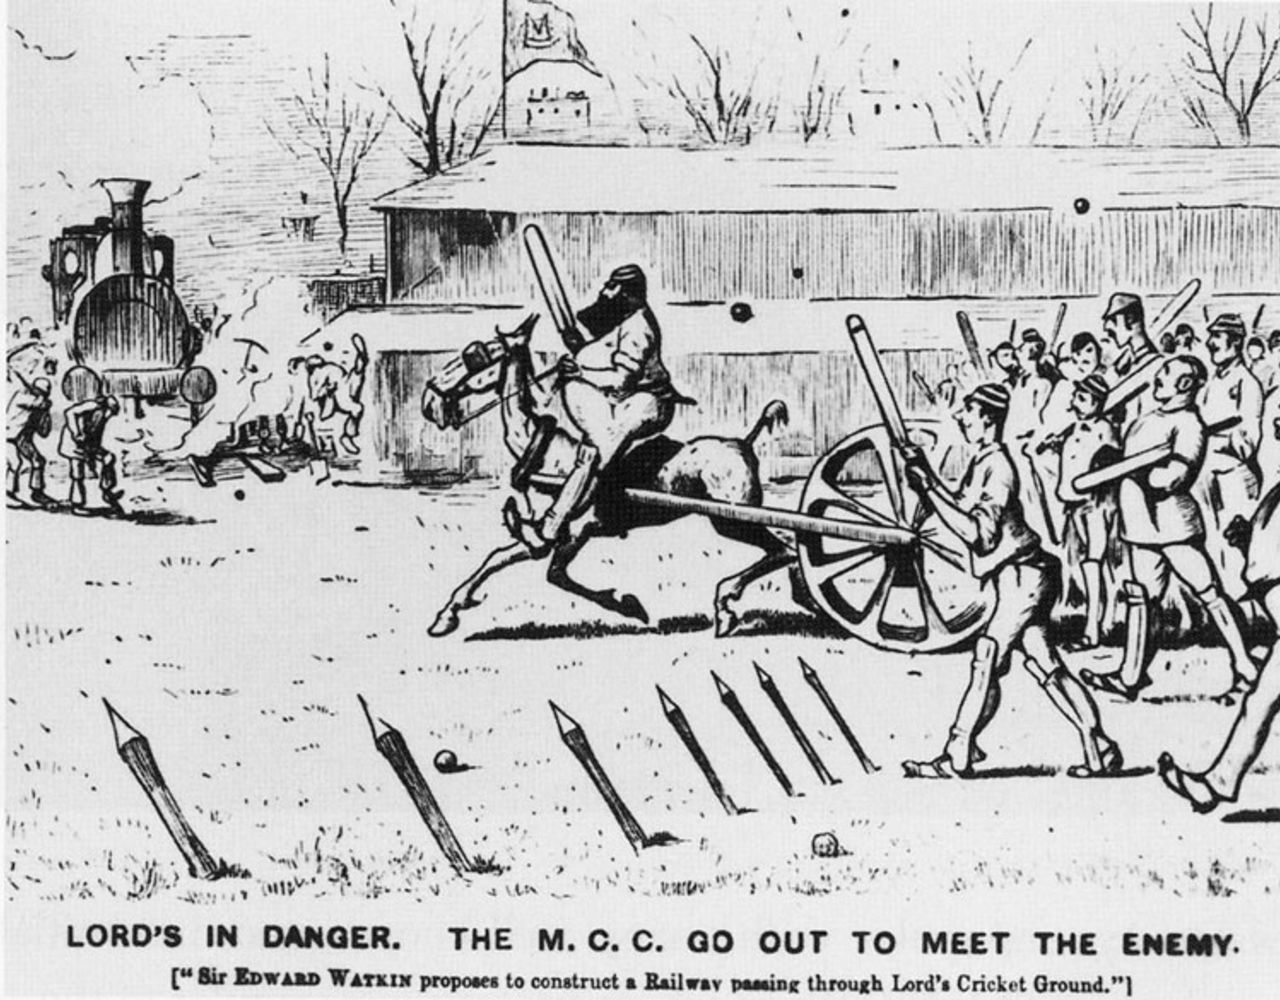 A <I>Punch</I> cartoon shows WG Grace leading the cricketers against the oncoming railway